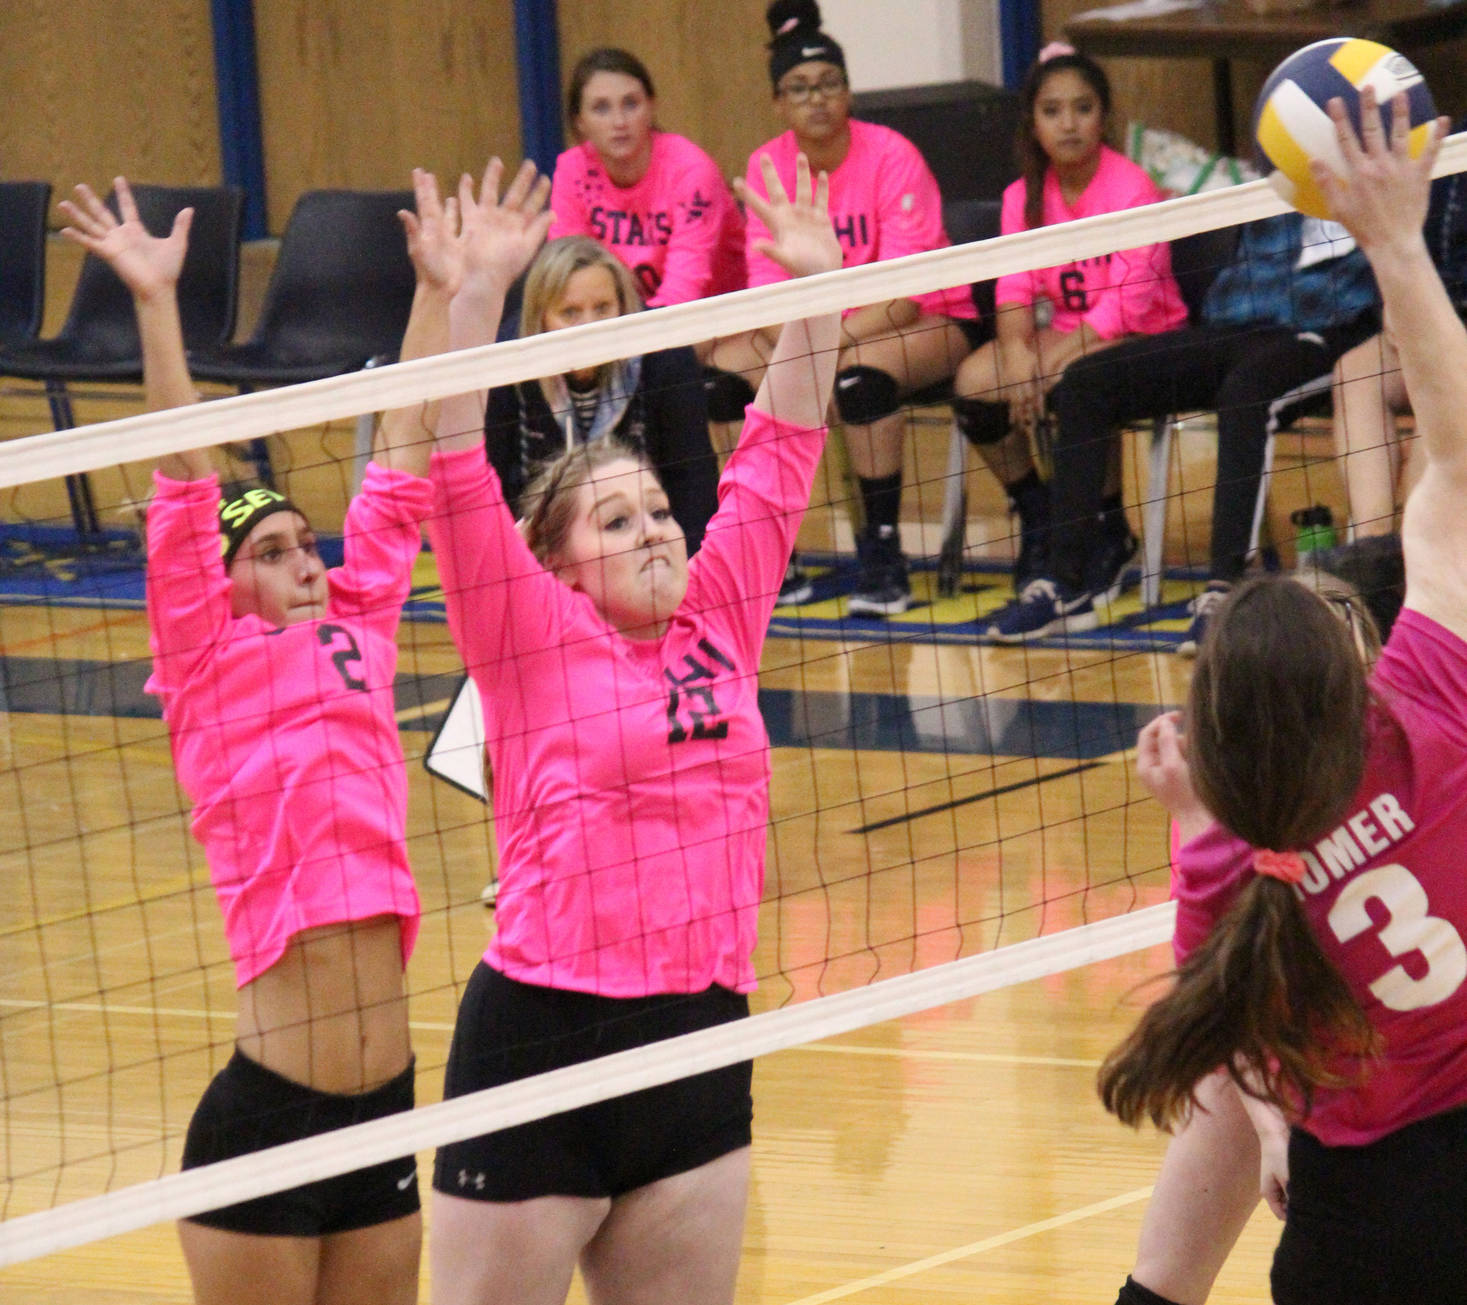 Soldotna High School’s Carsen Brown (left) and Bailey Leach (right) jump to block a spike from Homer’s Tonda Smude during their game Tuesday, Oct. 9, 2018 at the Alice Witte Gymnasium in Homer, Alaska. (Photo by Megan Pacer/Homer News)